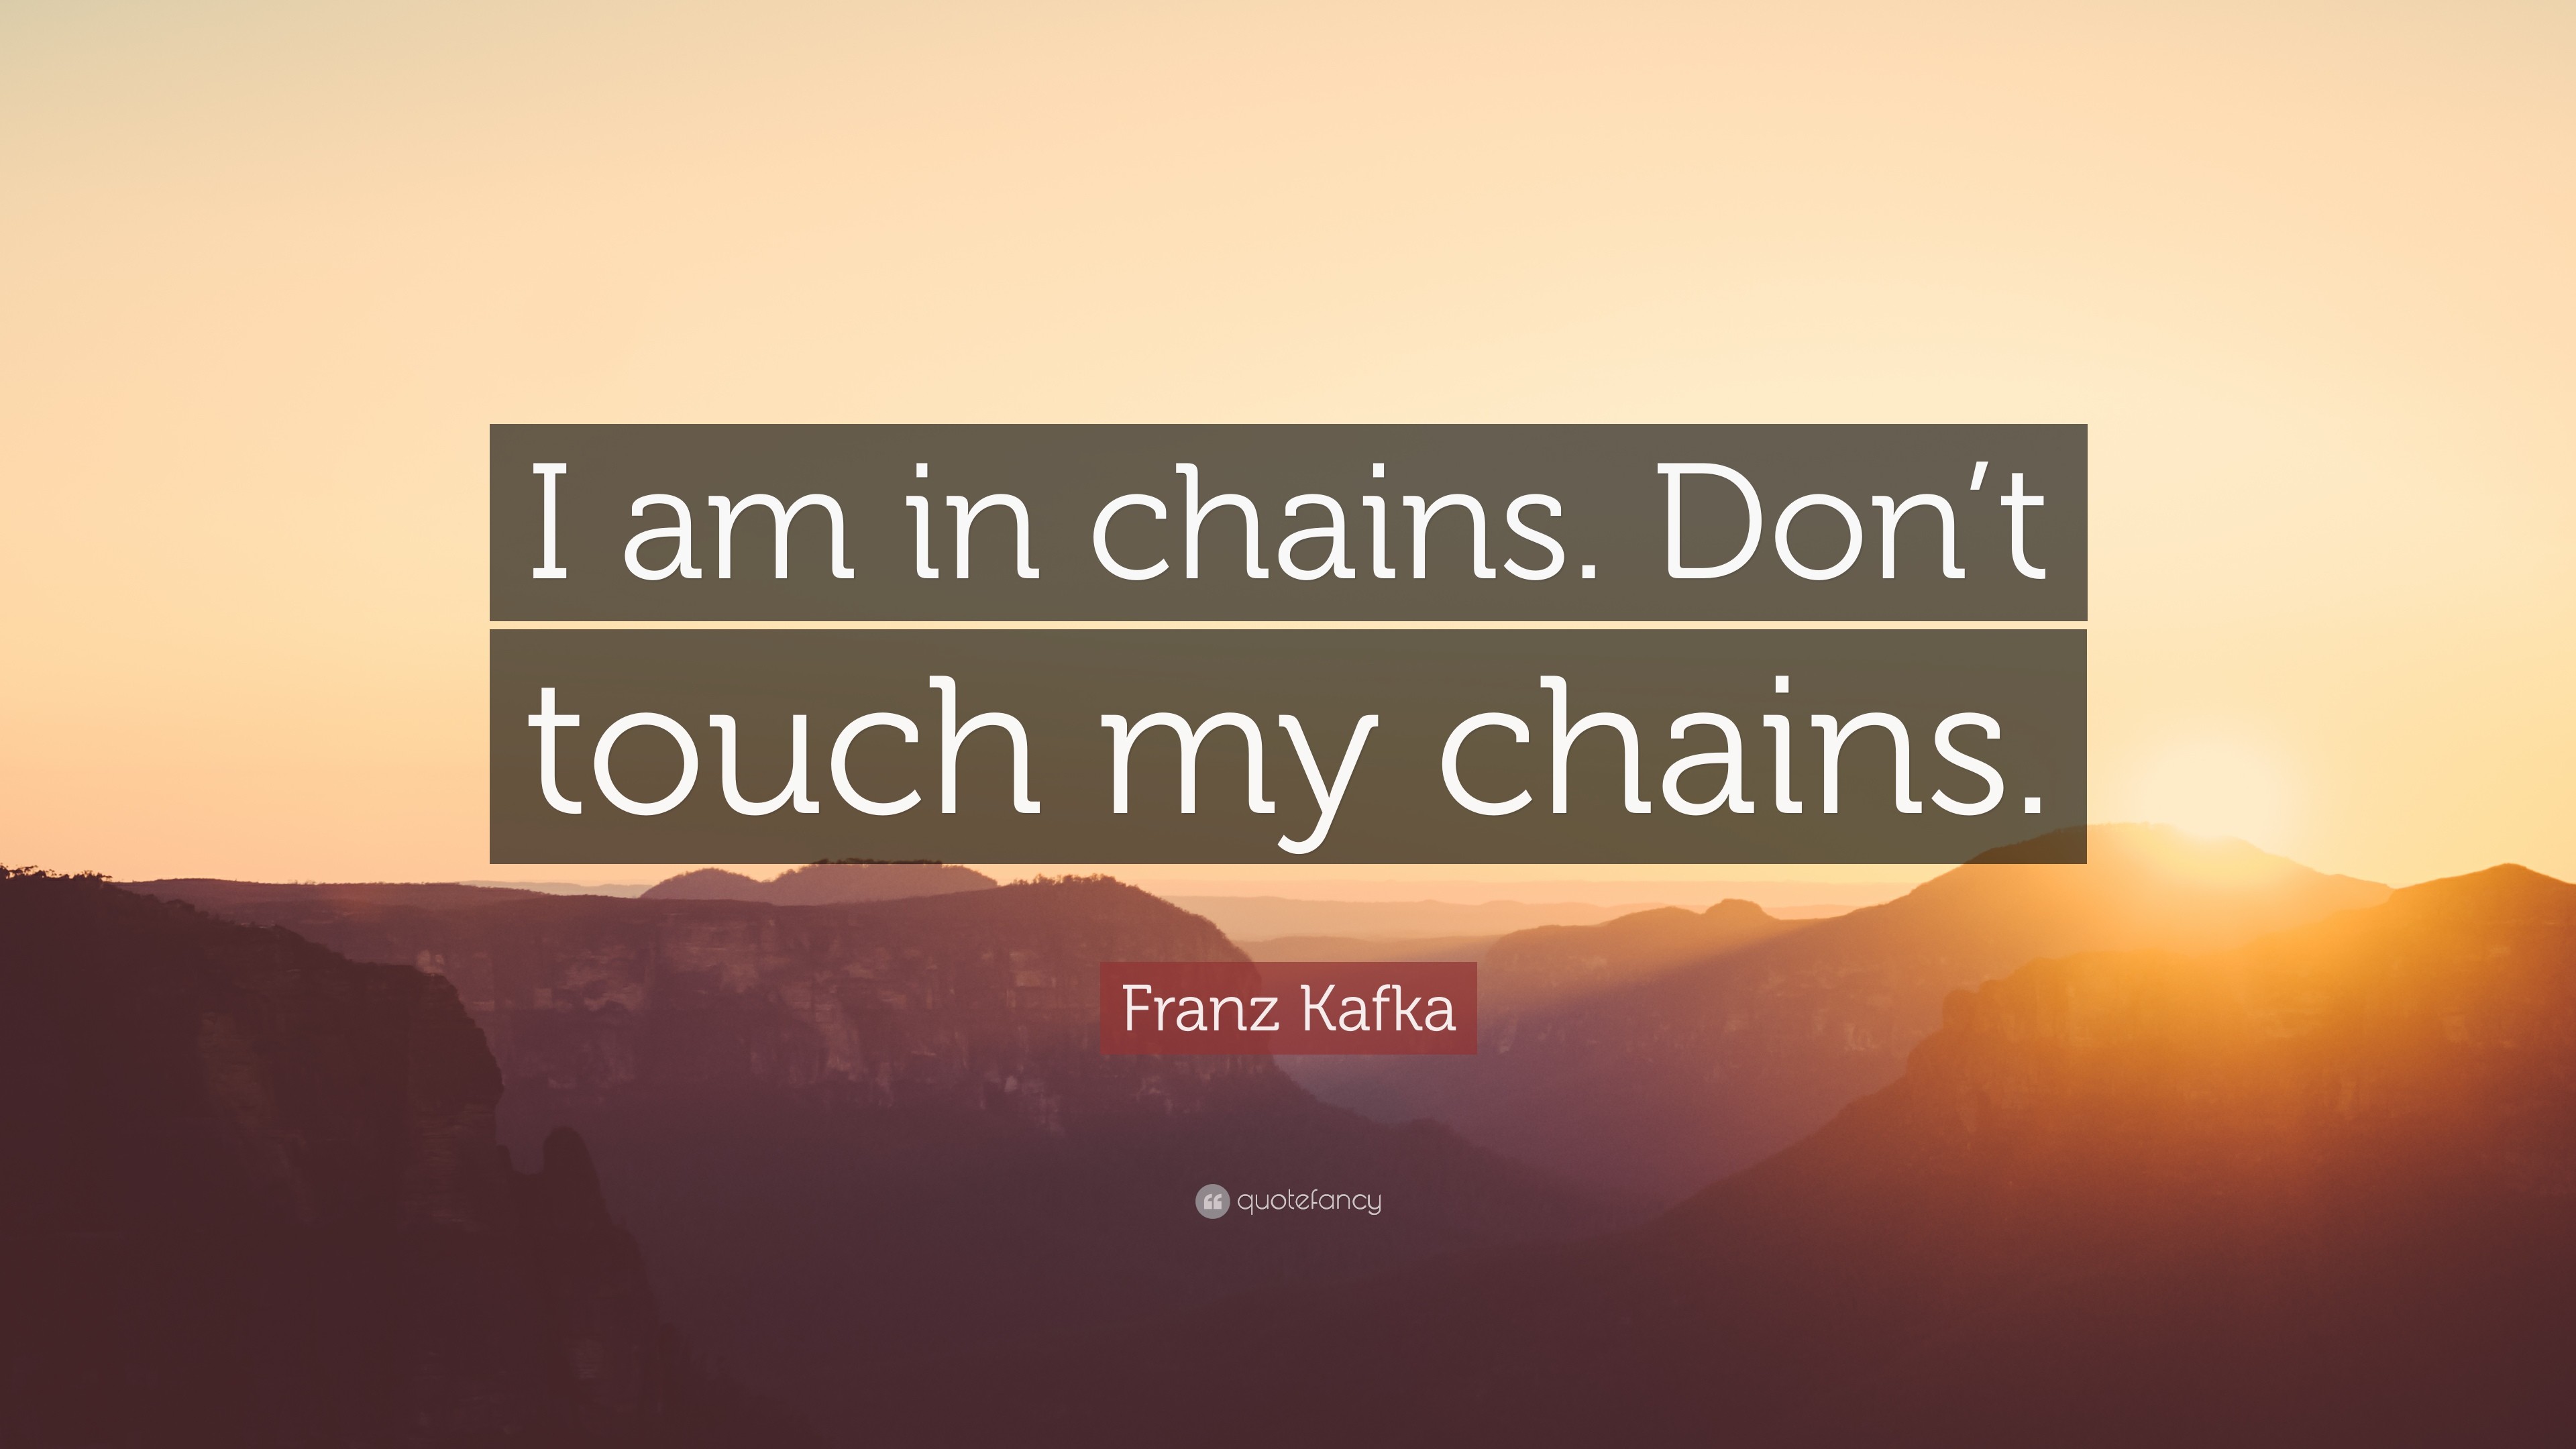 3840x2160 Franz Kafka Quote: “I am in chains. Don't touch my chains